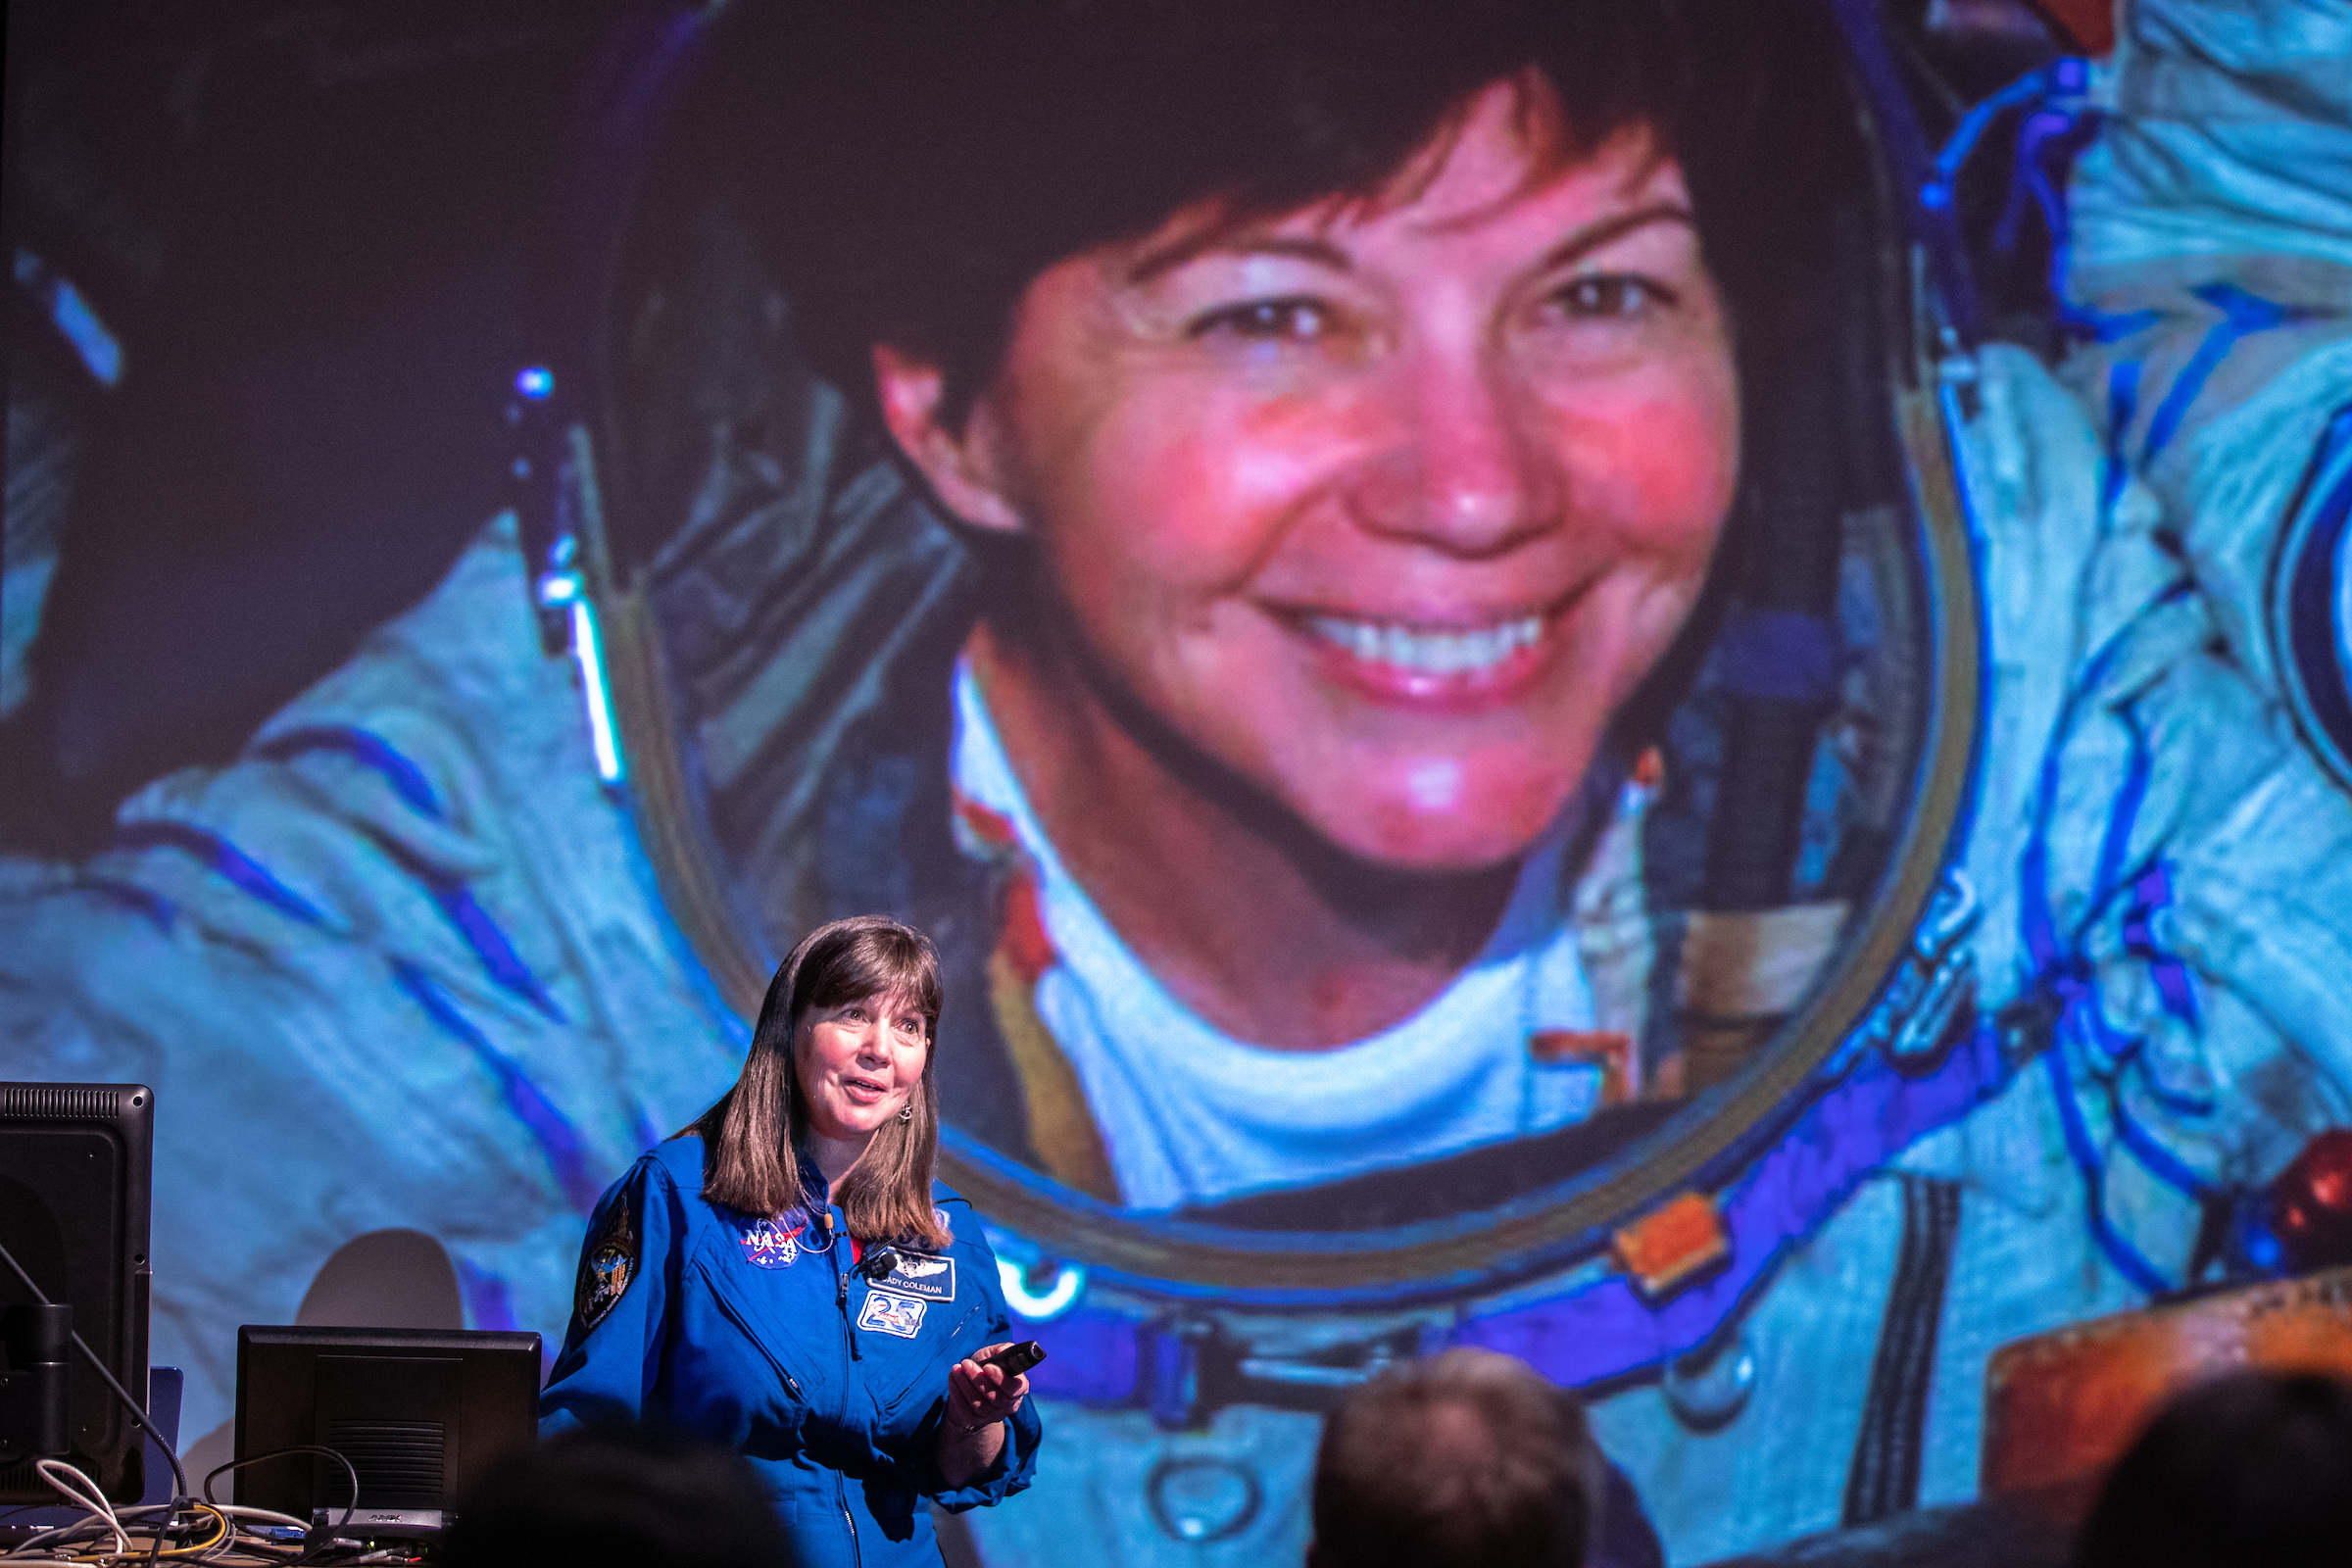 Global Explorer in Residence Cady Coleman delivers her inaugural lecture at ASU in front of a projection of a photo of her on a rocket